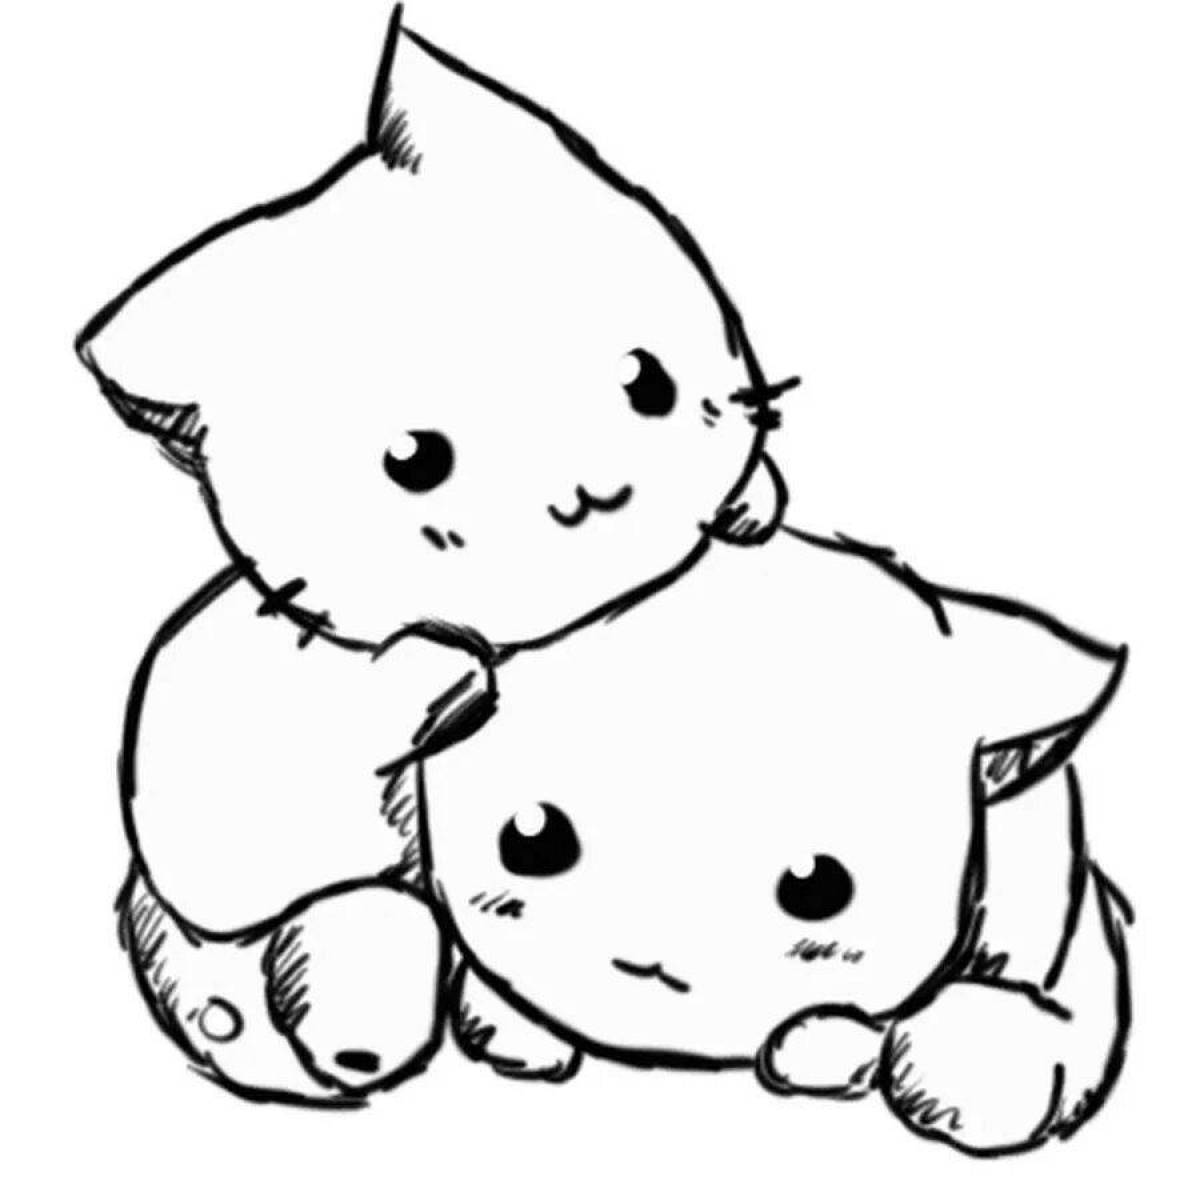 Coloring page with the fluffy face of the cutest cat